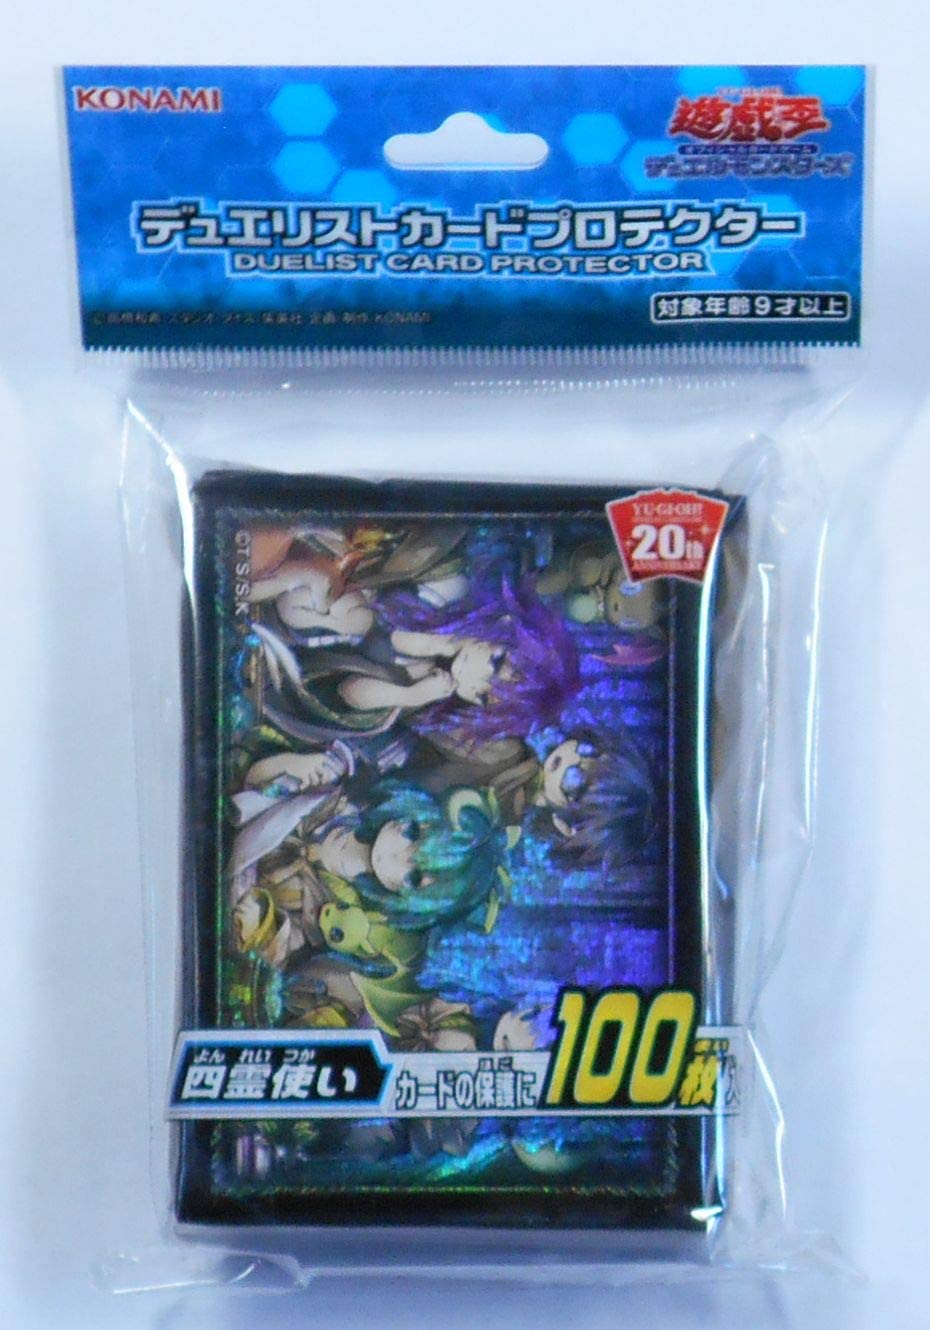 20TH ANNIVERSARY SILVER Sleeves 55pcs Yugioh Japanese Duelist Card Protector 